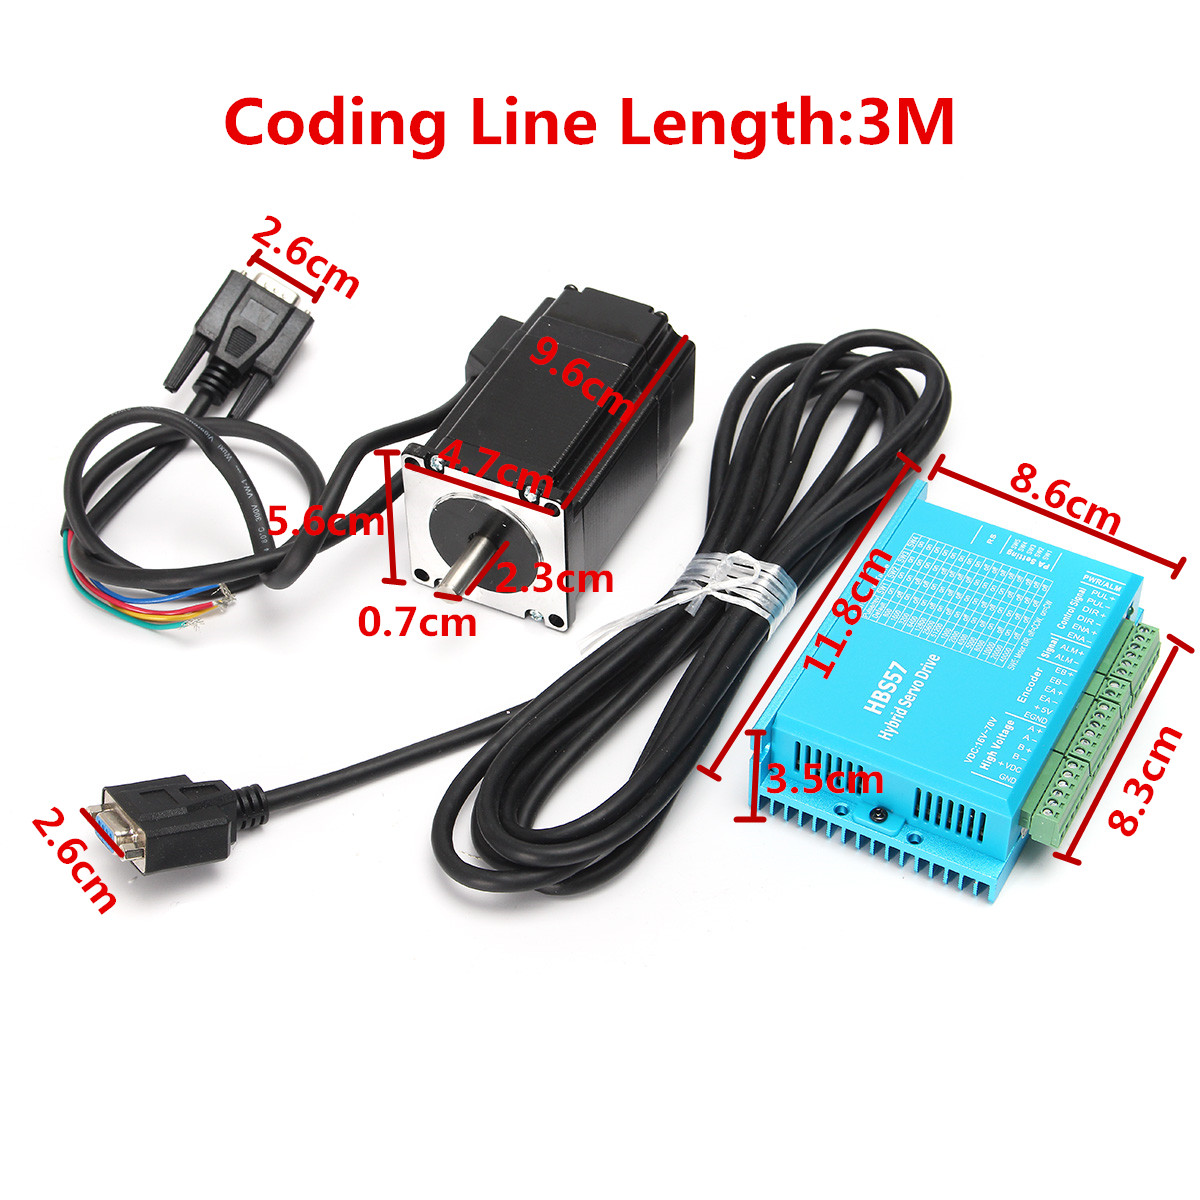 High Speed Closed Loop Stepper Motor + HBS57 Stepper Driver + Coding Cable Kit 12